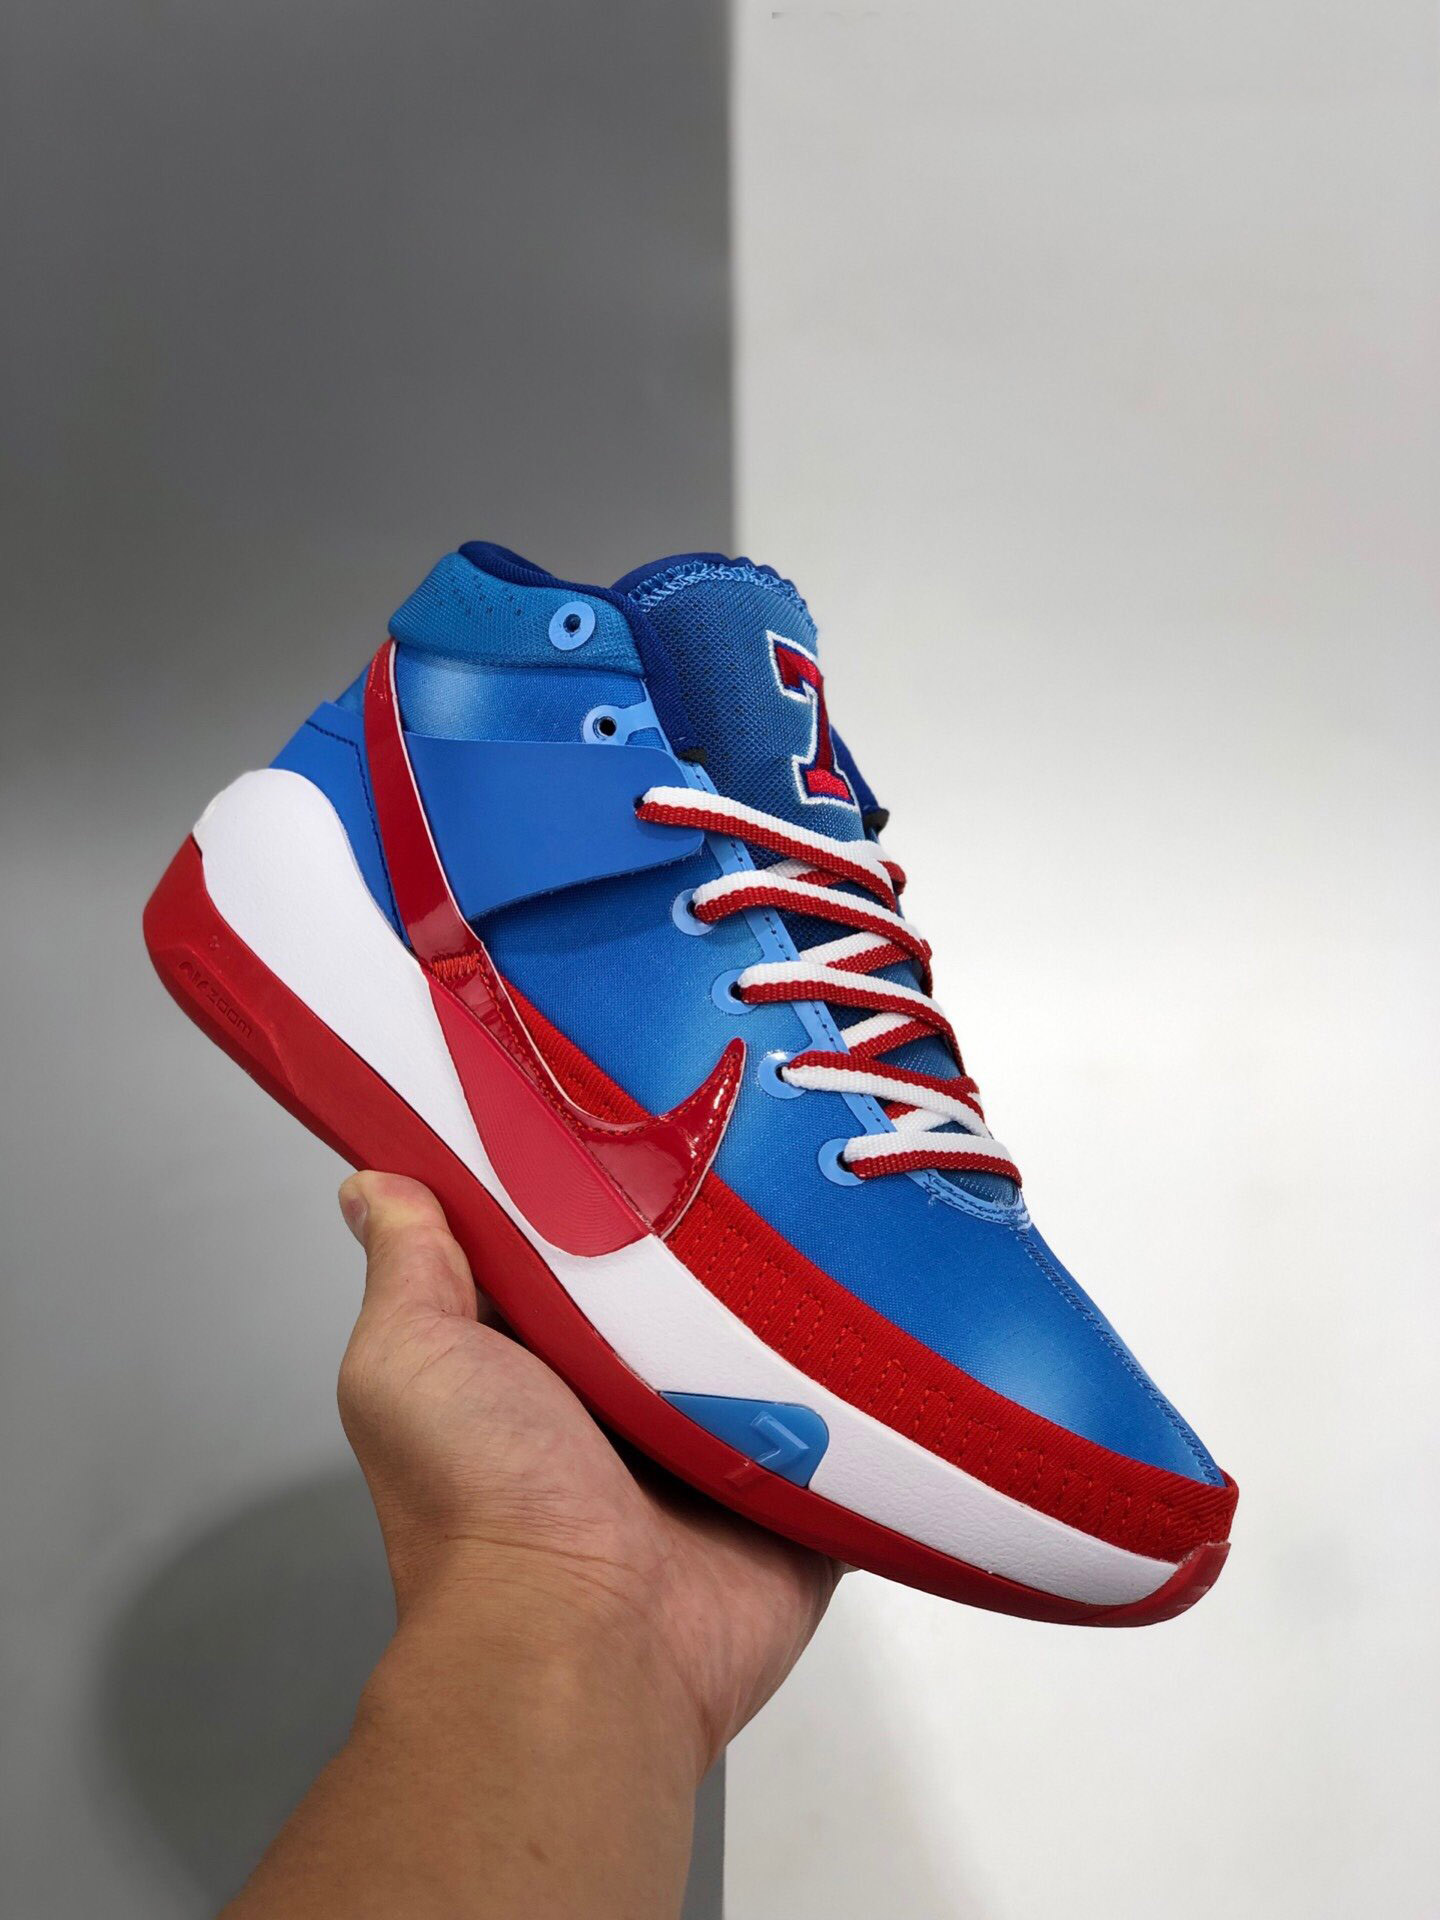 Nike KD 13 Blue Red Shoes